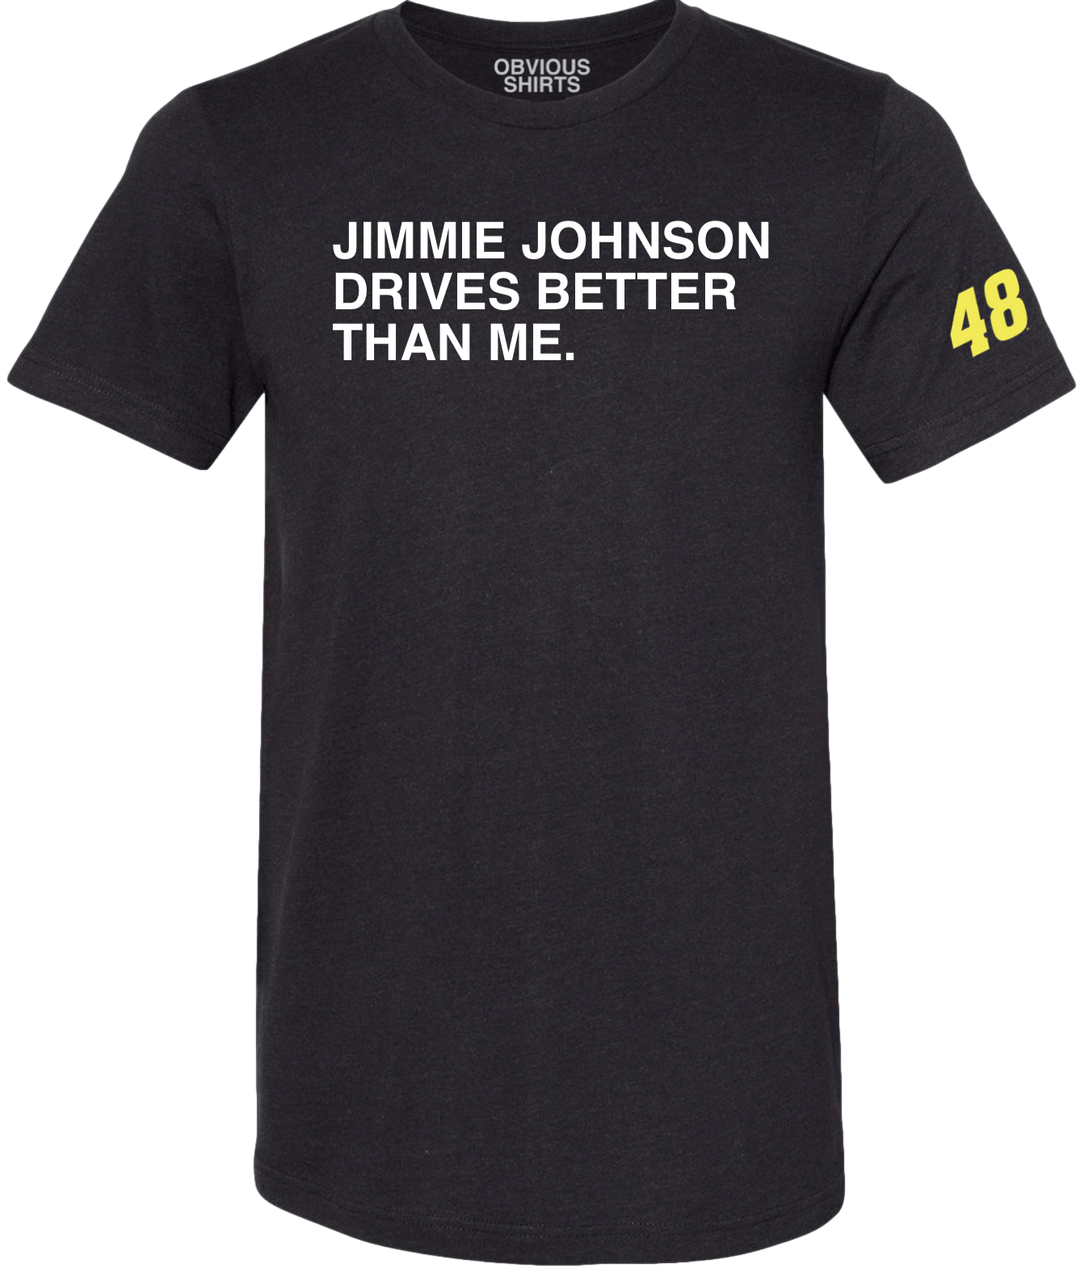 JIMMIE JOHNSON DRIVES BETTER THAN ME. - OBVIOUS SHIRTS